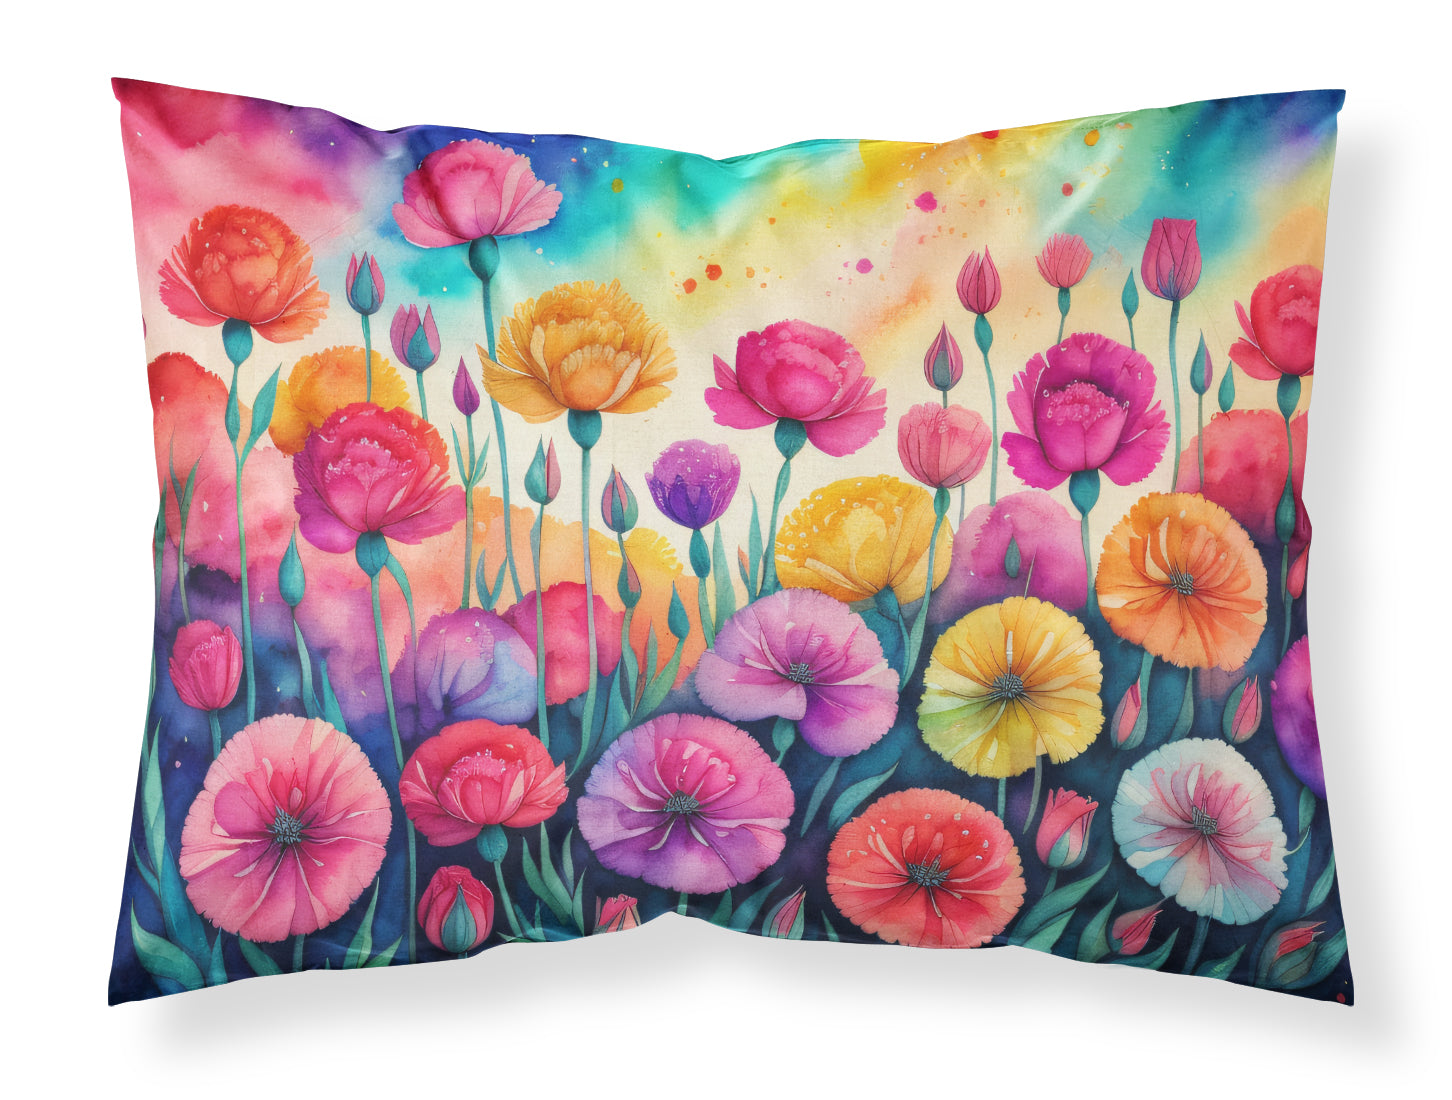 Buy this Carnations in Color Fabric Standard Pillowcase